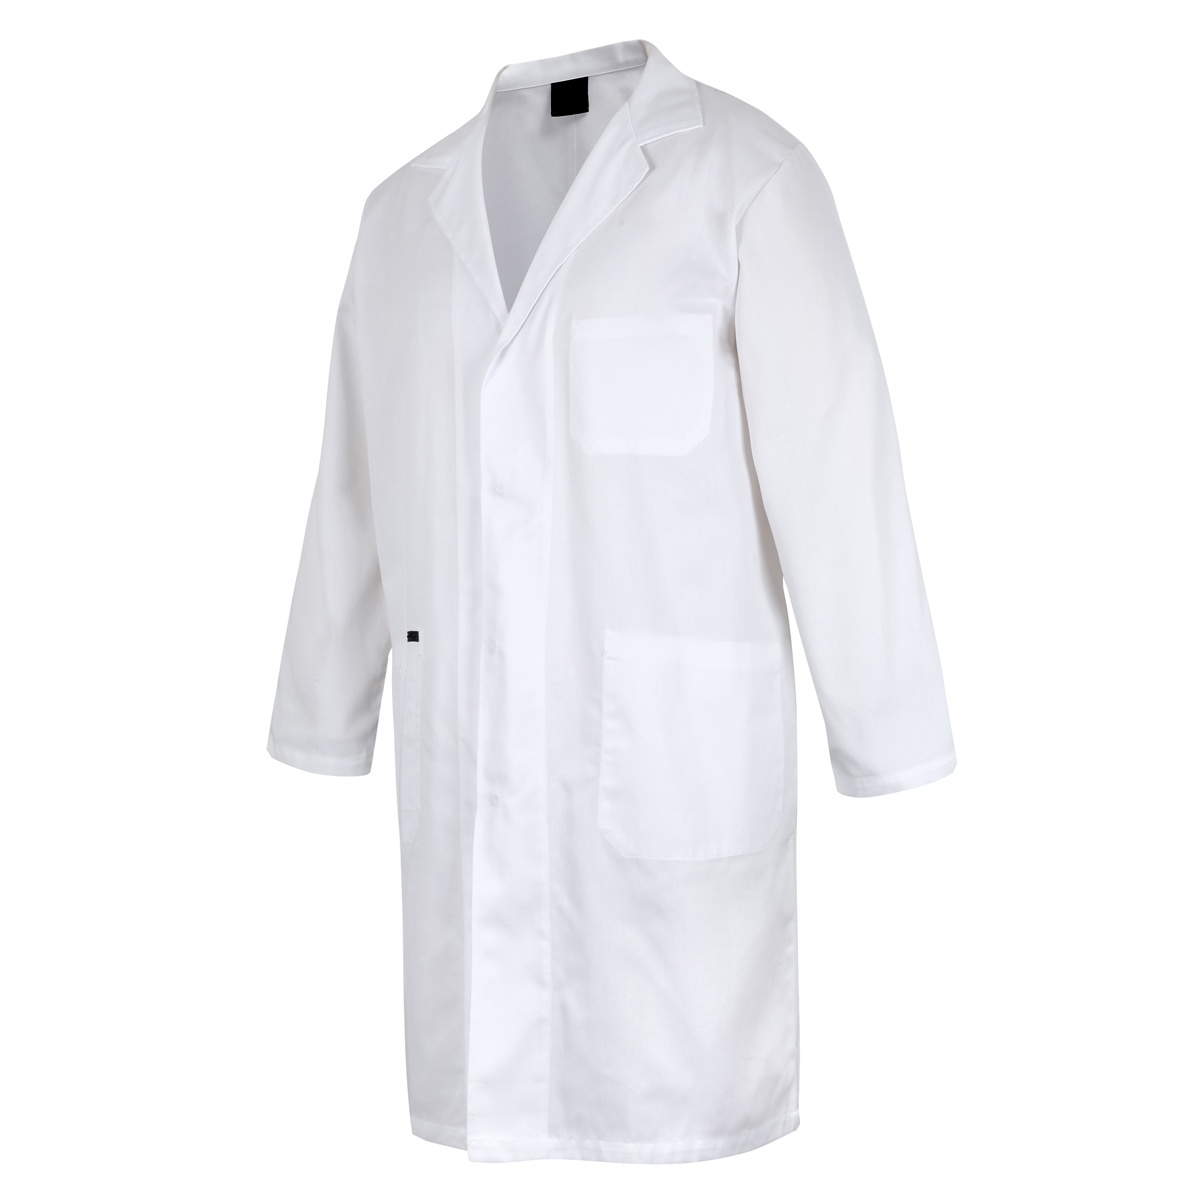 Dust/Lab Coat With Pockets - White